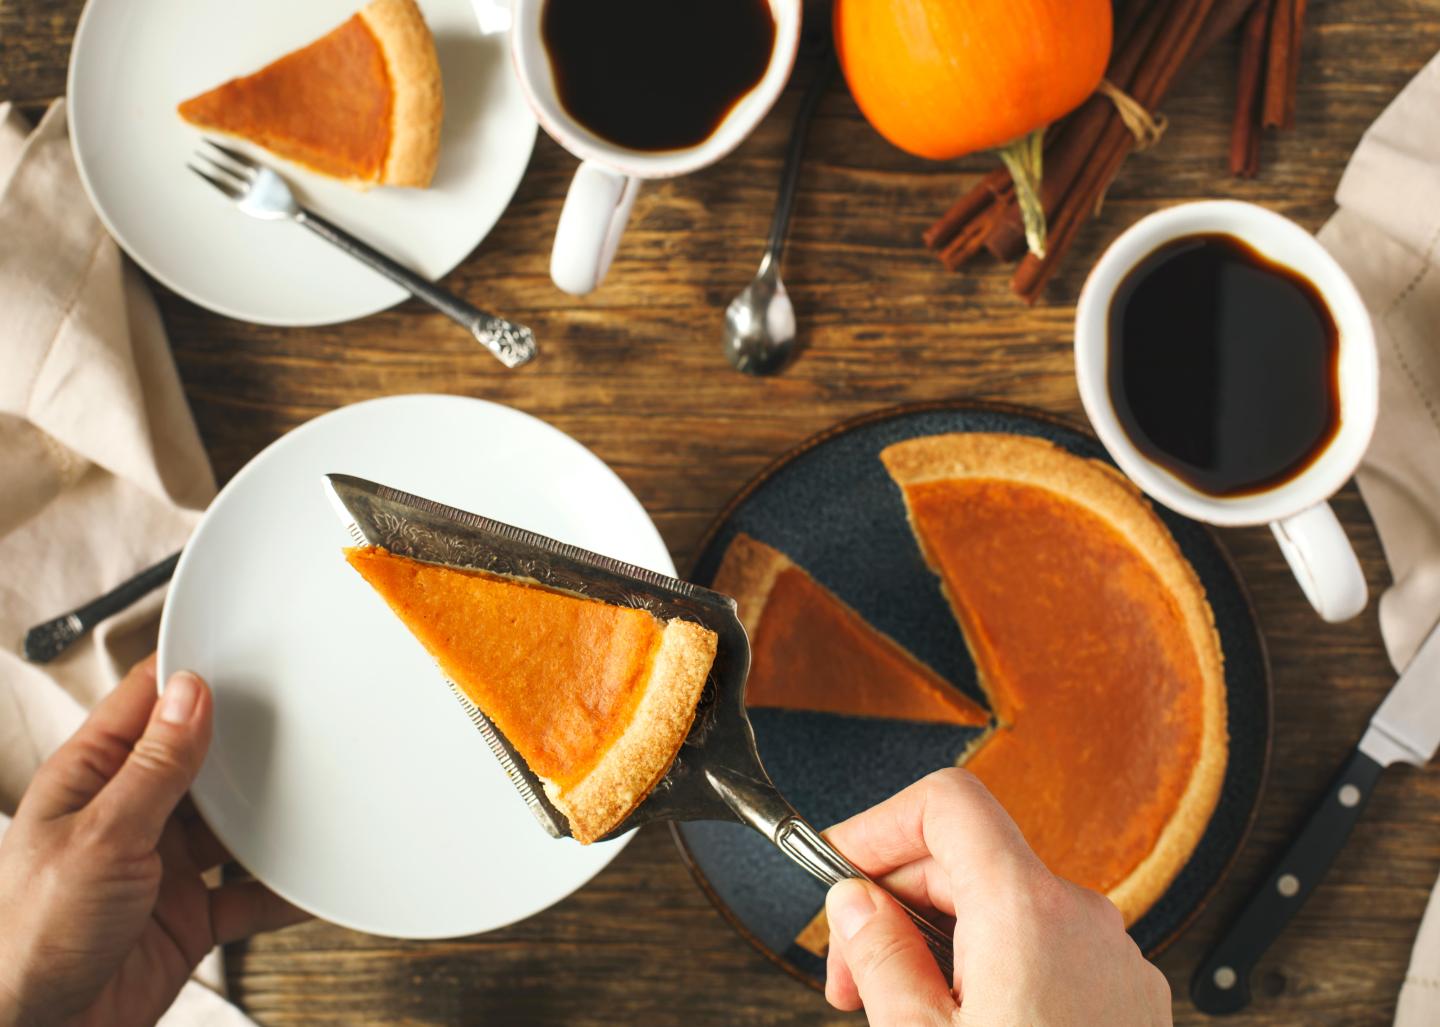 Slices of pumpkin pie with cups of coffee